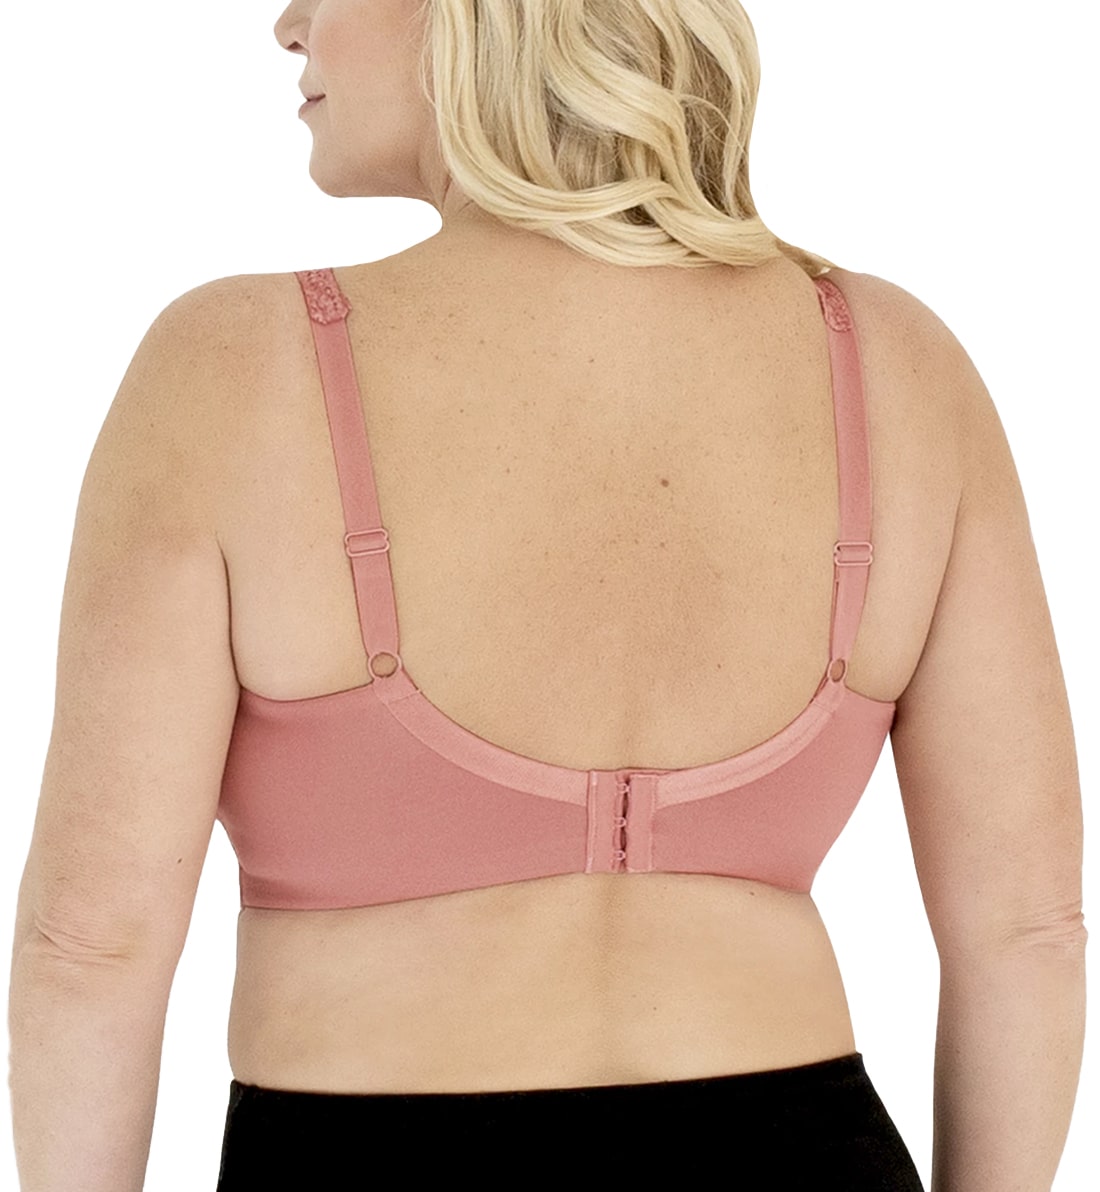 Leading Lady Wirefree Lace Trim Comfort Softcup Bra (5072),36 DD/F/G,Whisky Rose - Whisky Rose,36 DD/F/G